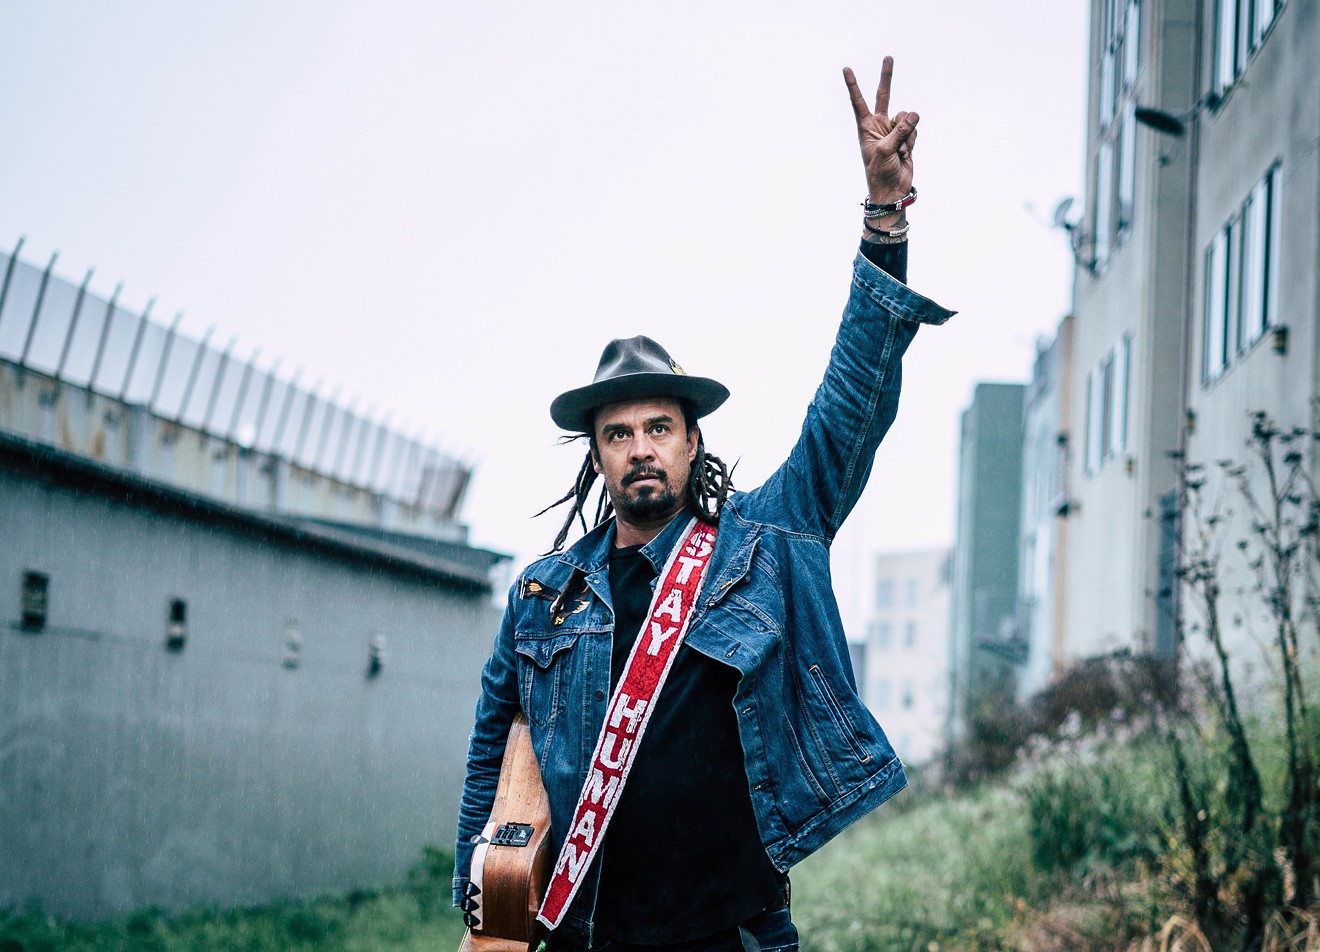 Michael Franti and Spearhead are scheduled to perform on Friday, June 14, at Mesa Amphitheatre.